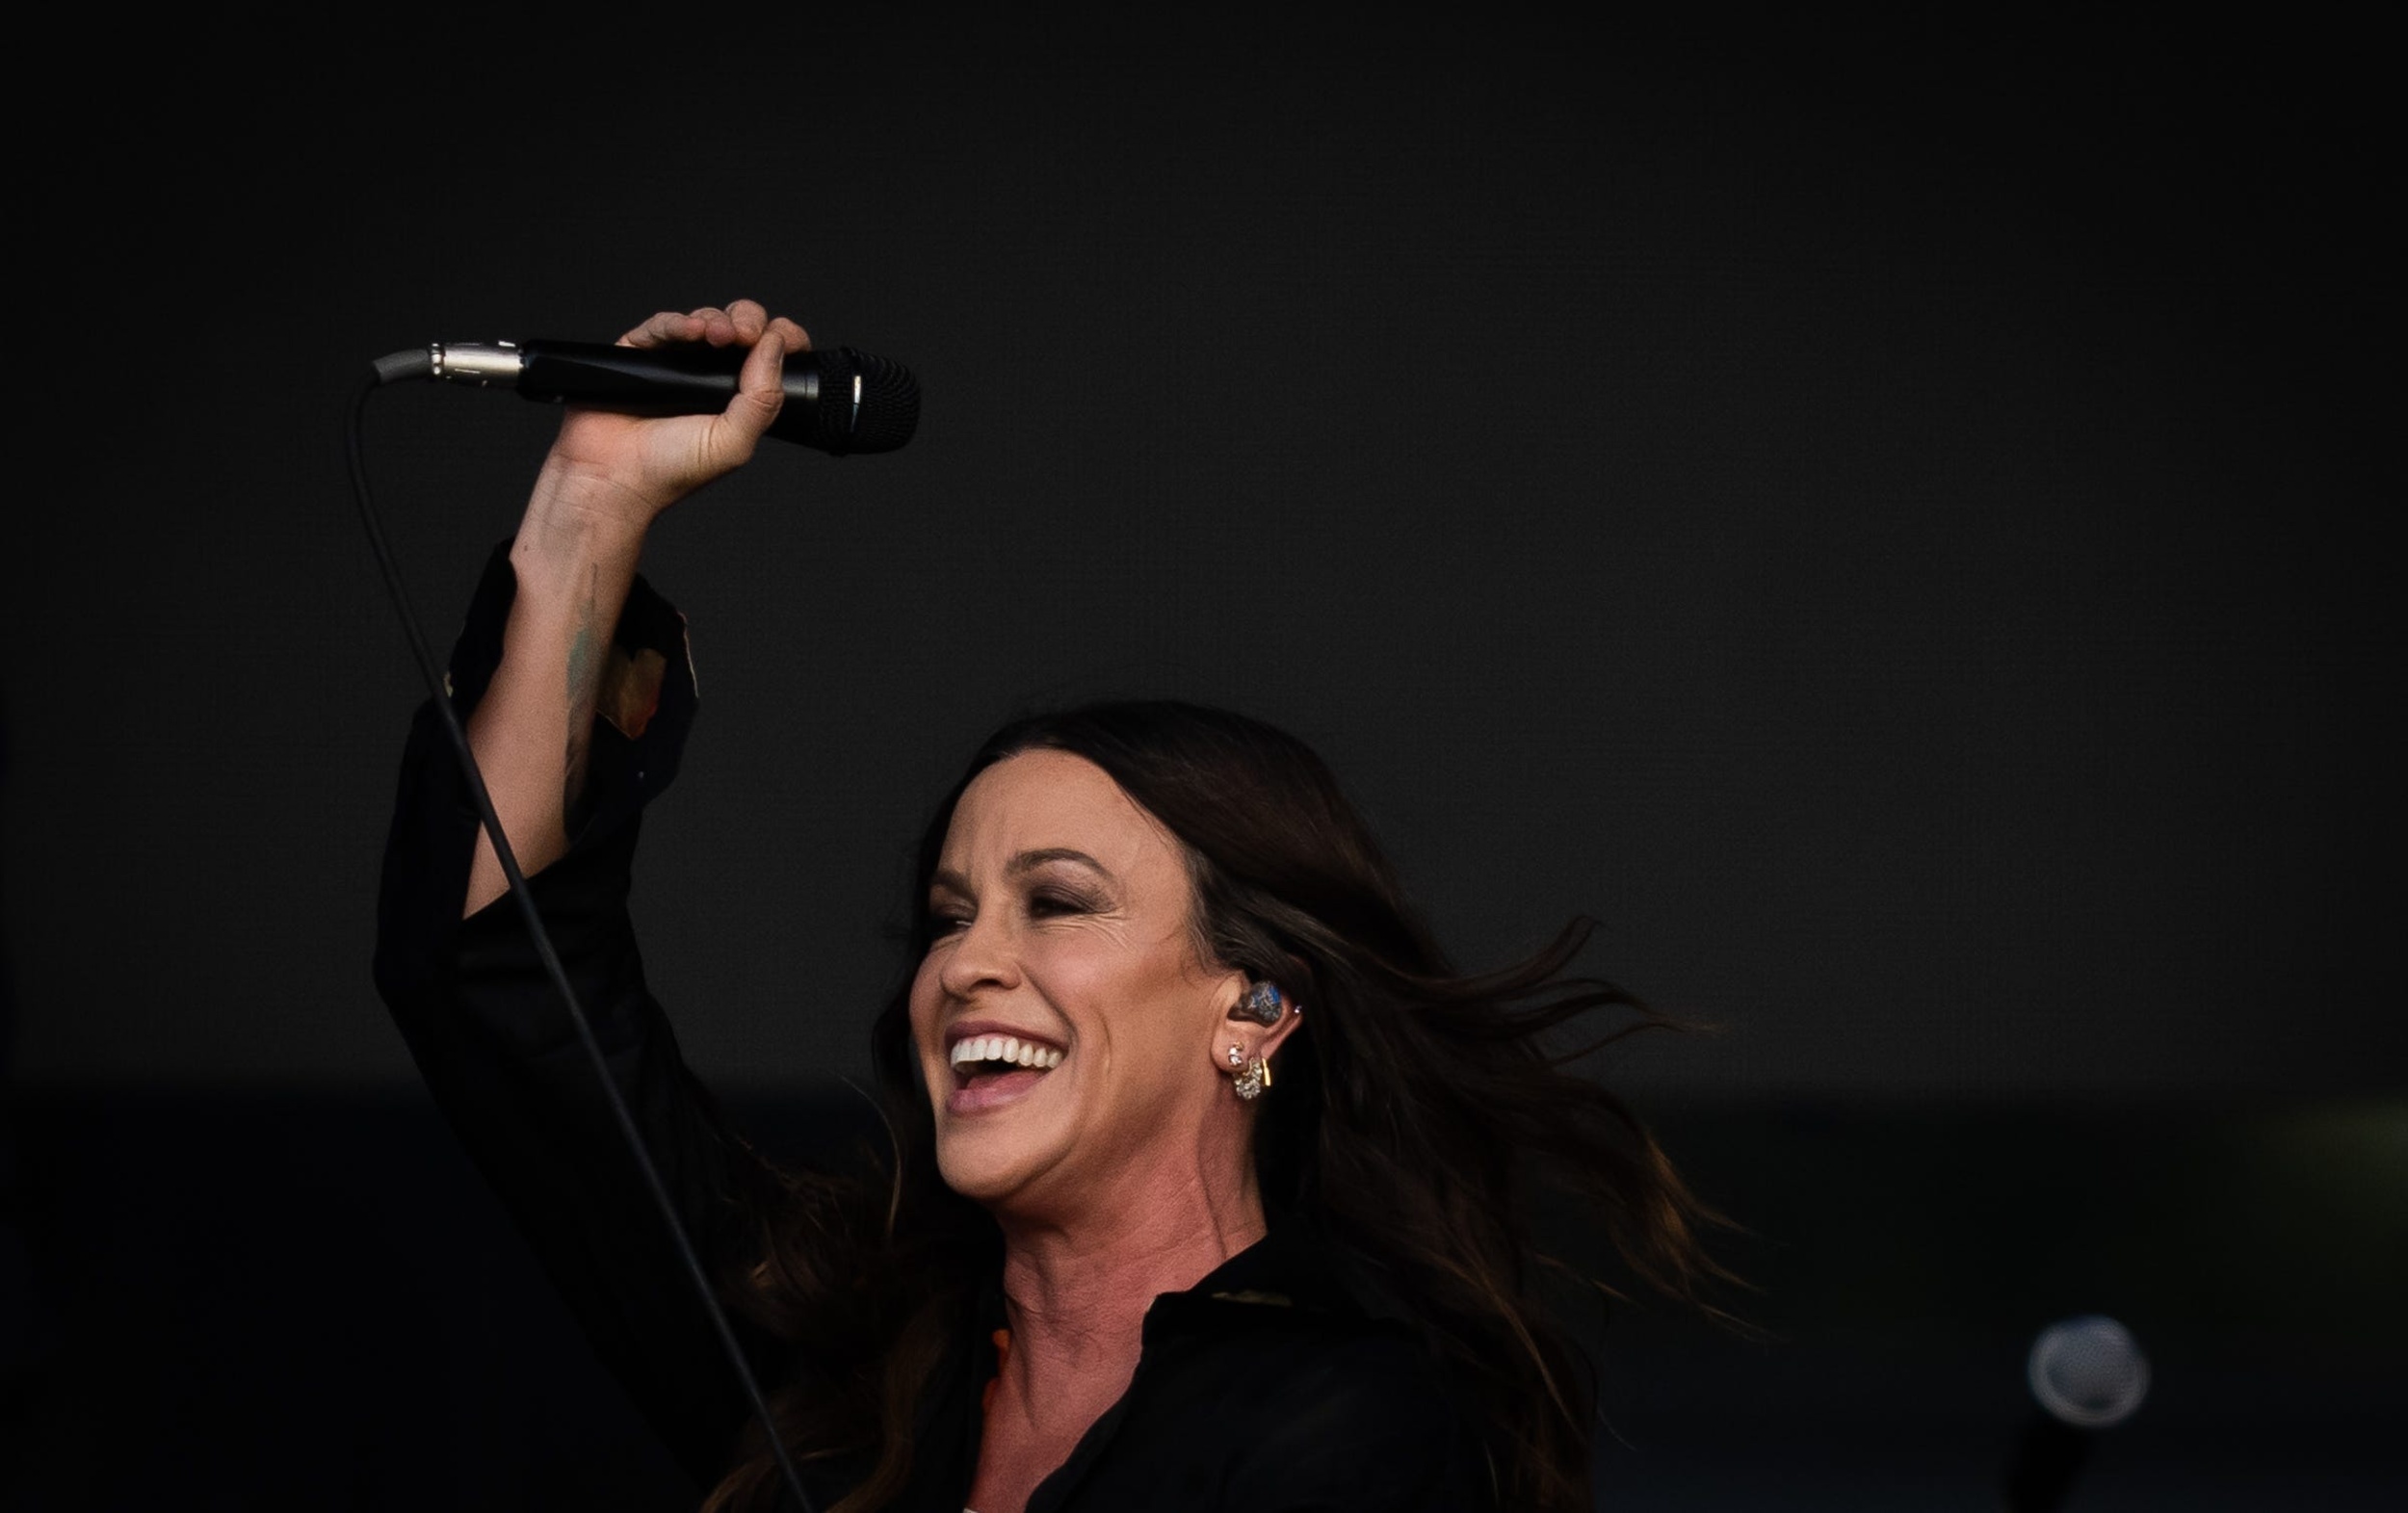 <p>The queen of '90s, Gen X angst, Alanis toured on the 25th anniversary of her 1995<a href="https://www.youtube.com/watch?v=CUjIY_XxF1g"> <em>Jagged Little Pill</em> </a>in recent years, but that was interrupted by COVID-19 and then picked up again. Now, for 2024, she's back on the road — with the legendary Joan Jett helping out — for a 30-plus city tour spanning parts of June, July and August. Morissette has been visible in recent years, thus garnering interest from a new generation of fans who appreciate the social brilliance of Generation X.</p><p><a href='https://www.msn.com/en-us/community/channel/vid-cj9pqbr0vn9in2b6ddcd8sfgpfq6x6utp44fssrv6mc2gtybw0us'>Follow us on MSN to see more of our exclusive entertainment content.</a></p>